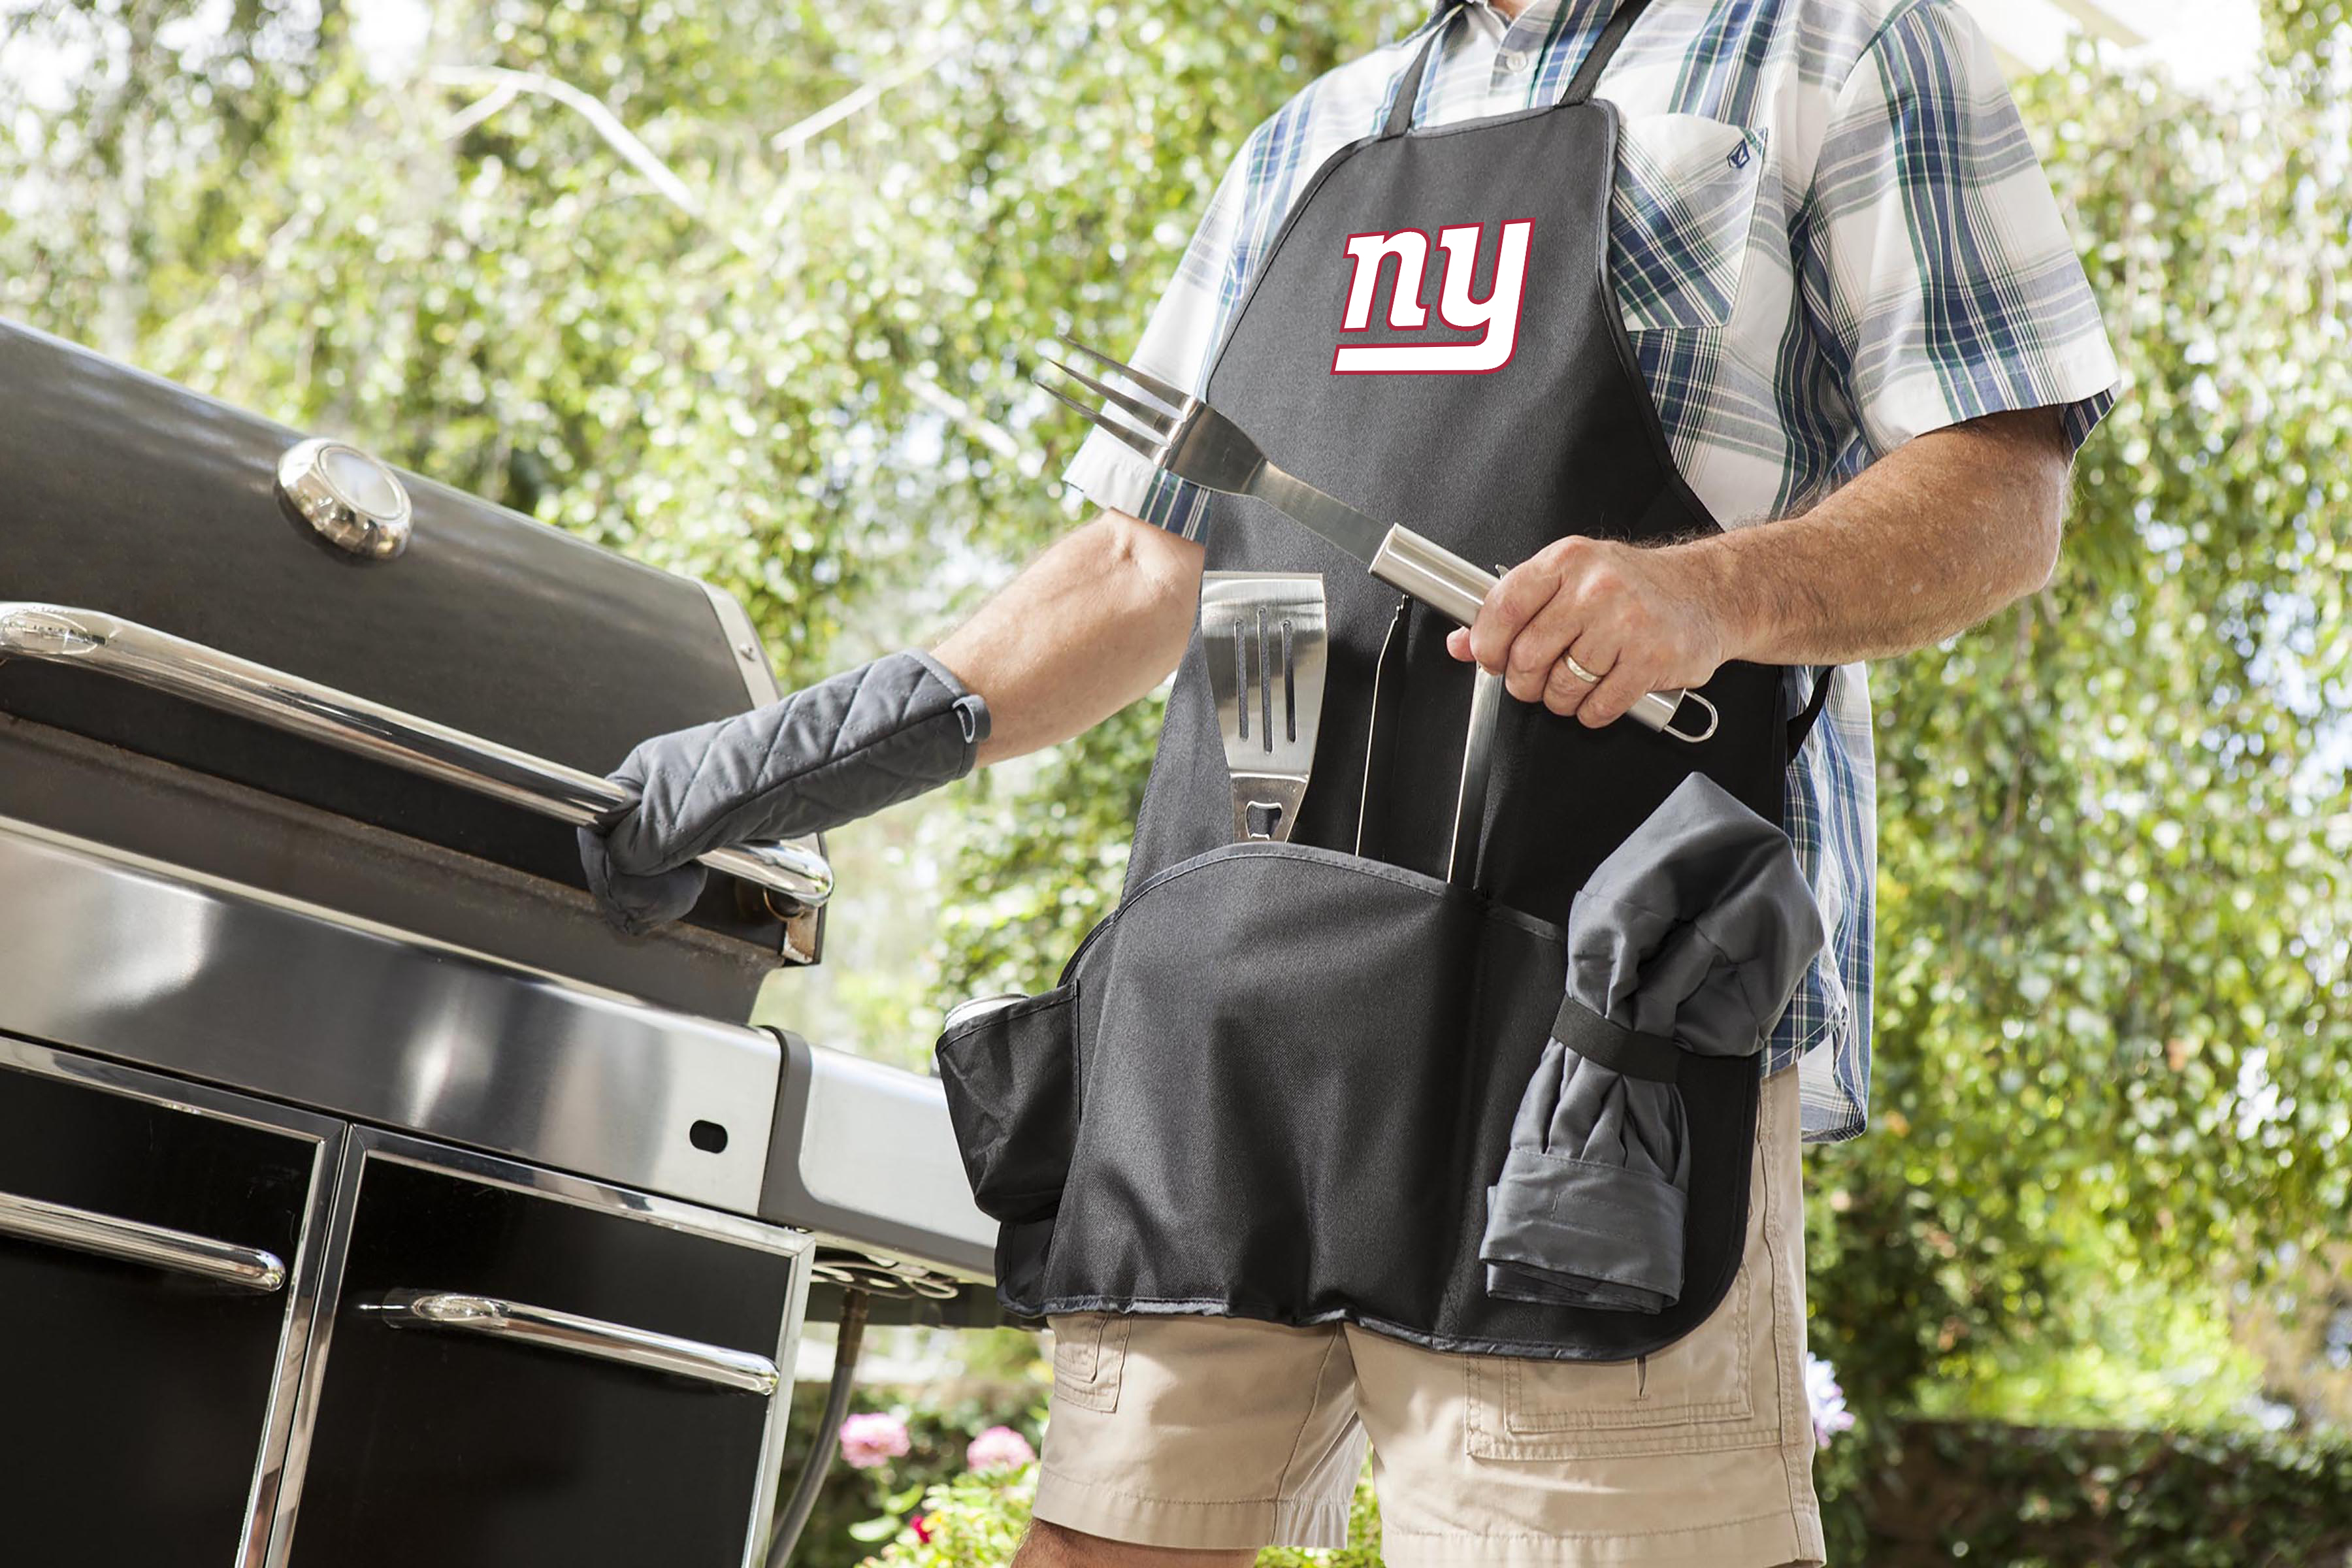 New York Giants - BBQ Apron Tote Pro Grill Set